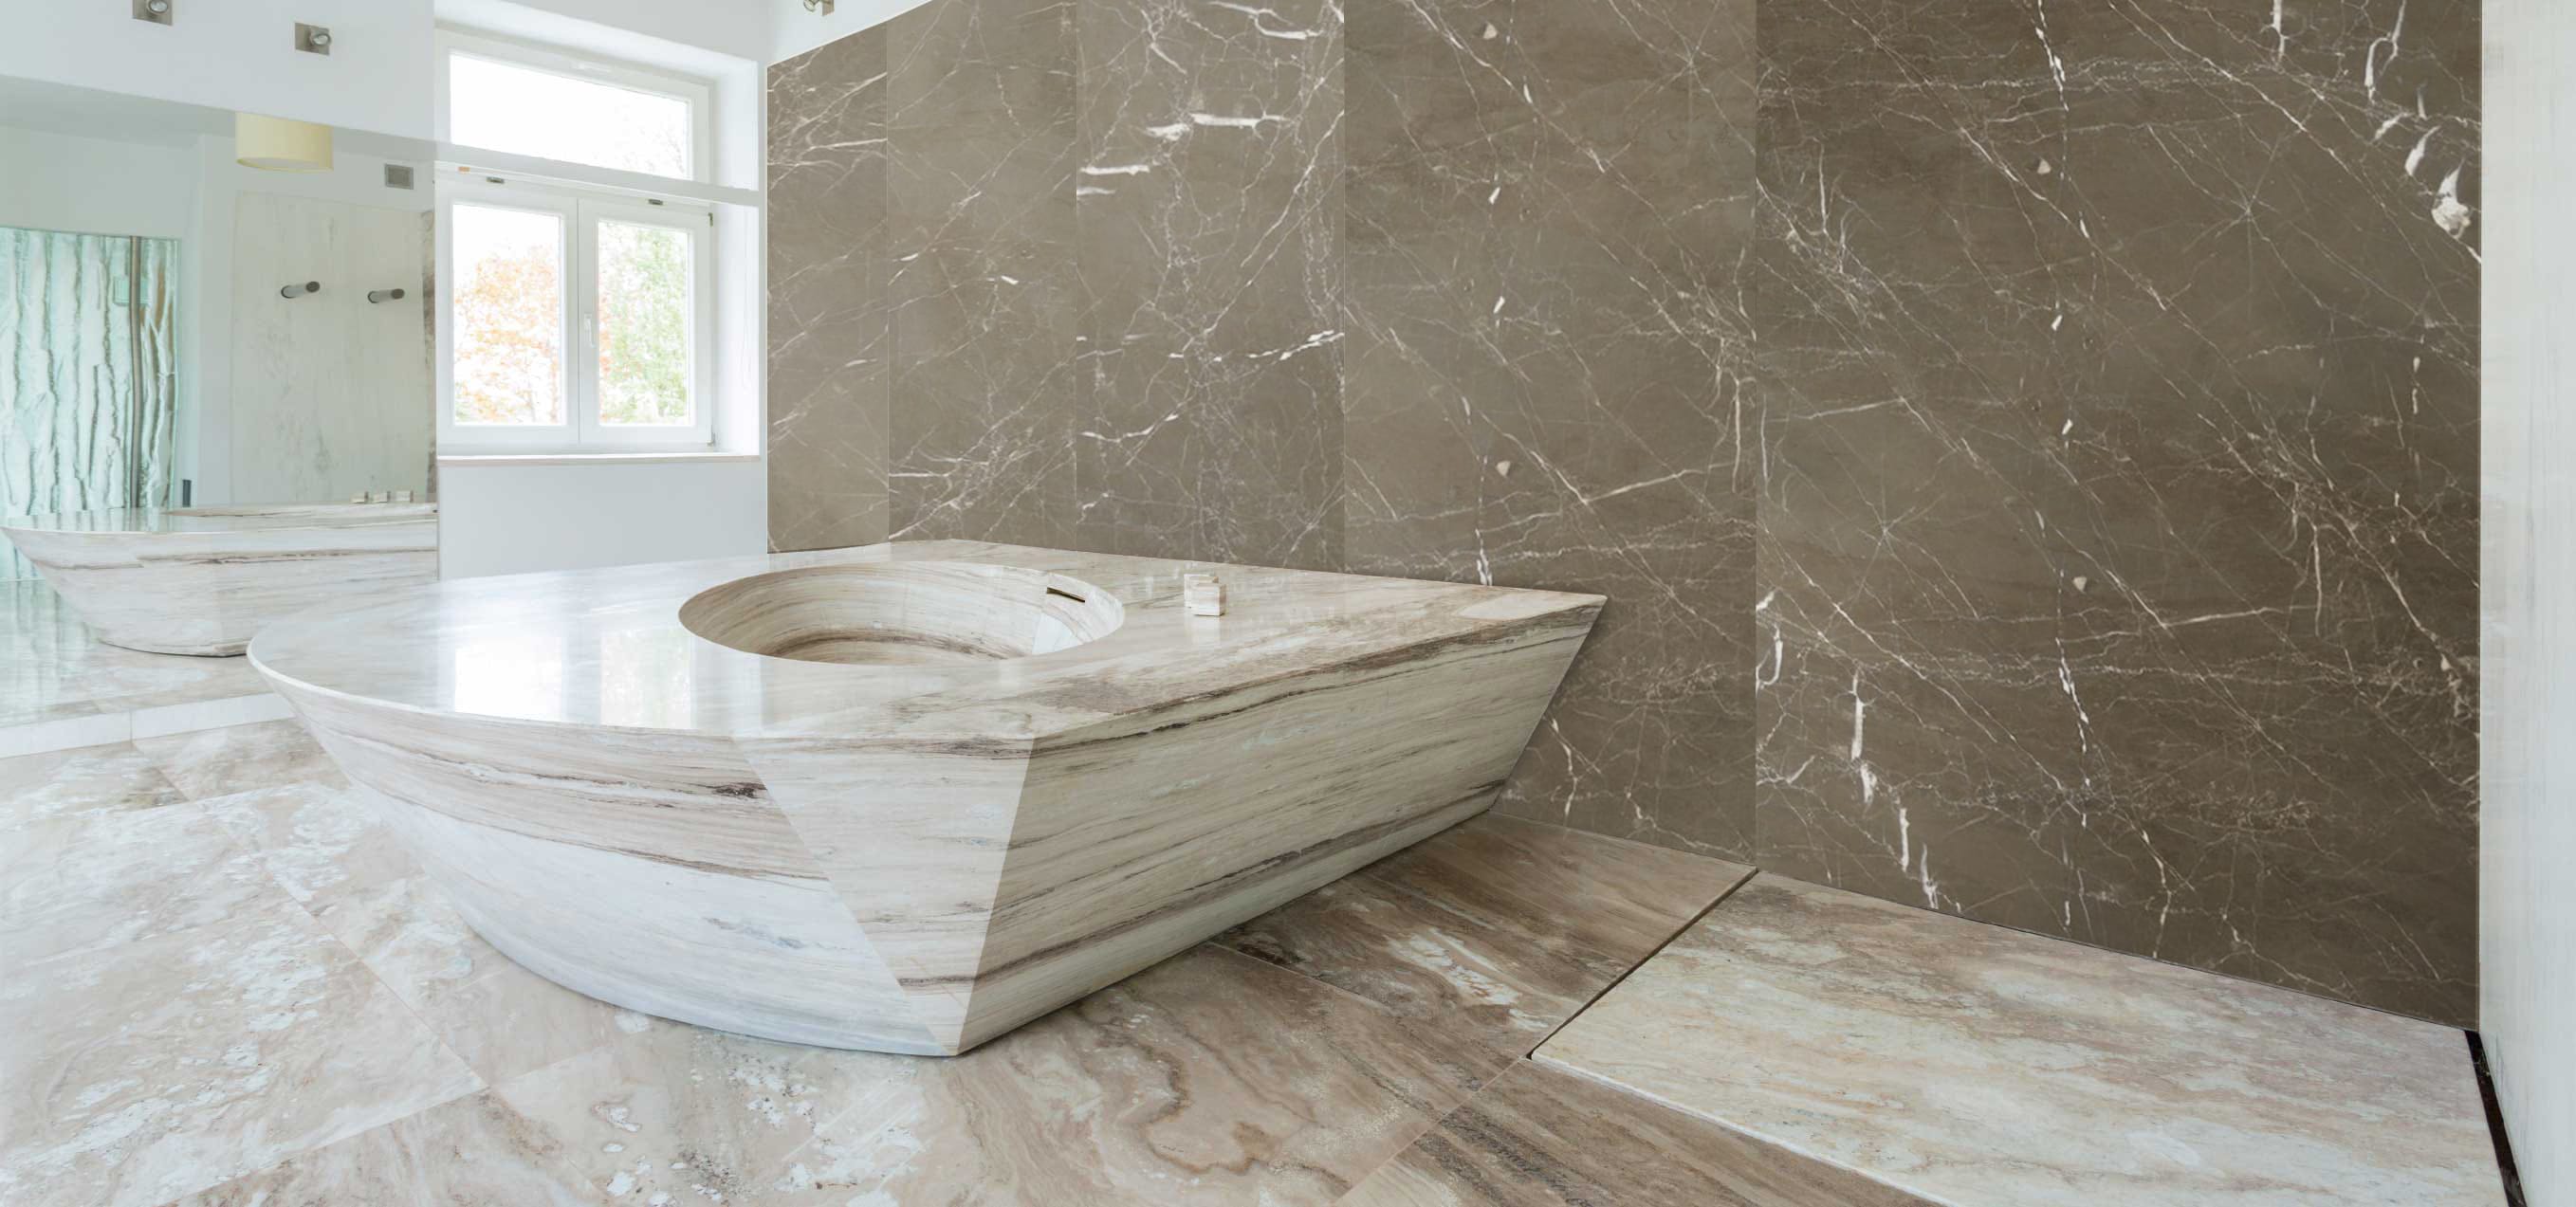 Marble Bathtubs One Piece Or Coated, Solid Marble Bathtub